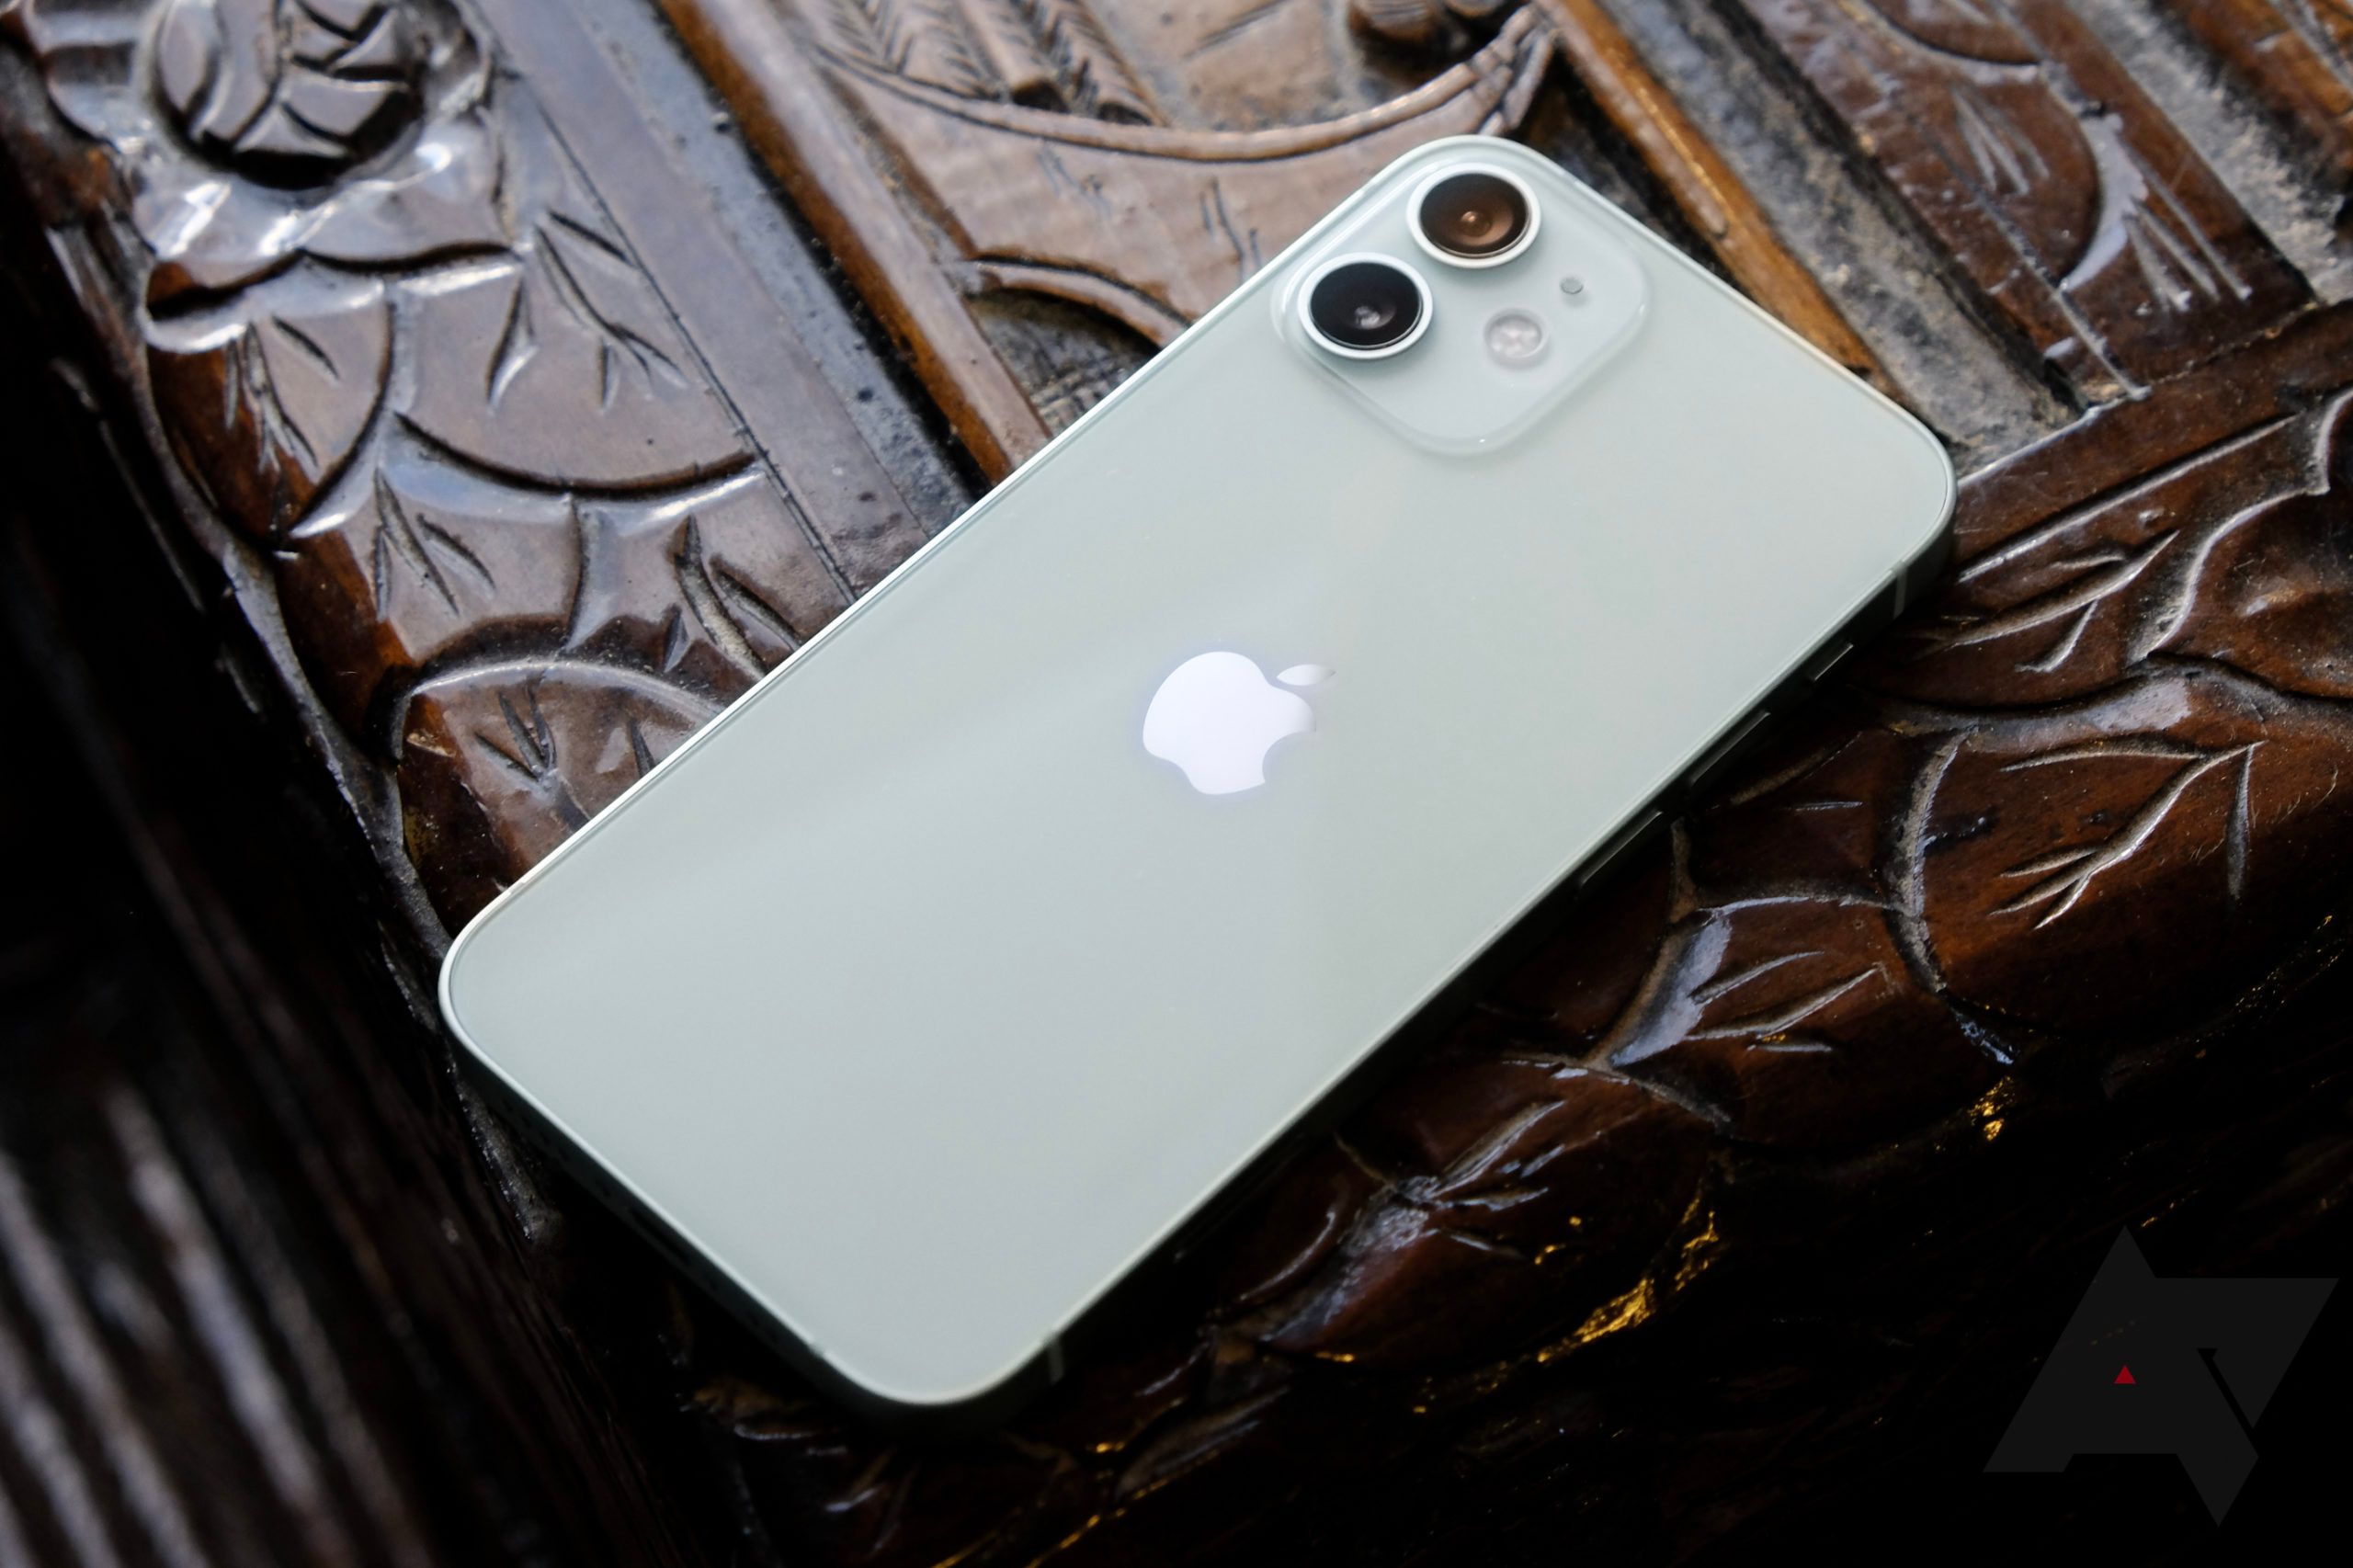 An iPhone 12 mini sits on a carved and lacquered wood surface.